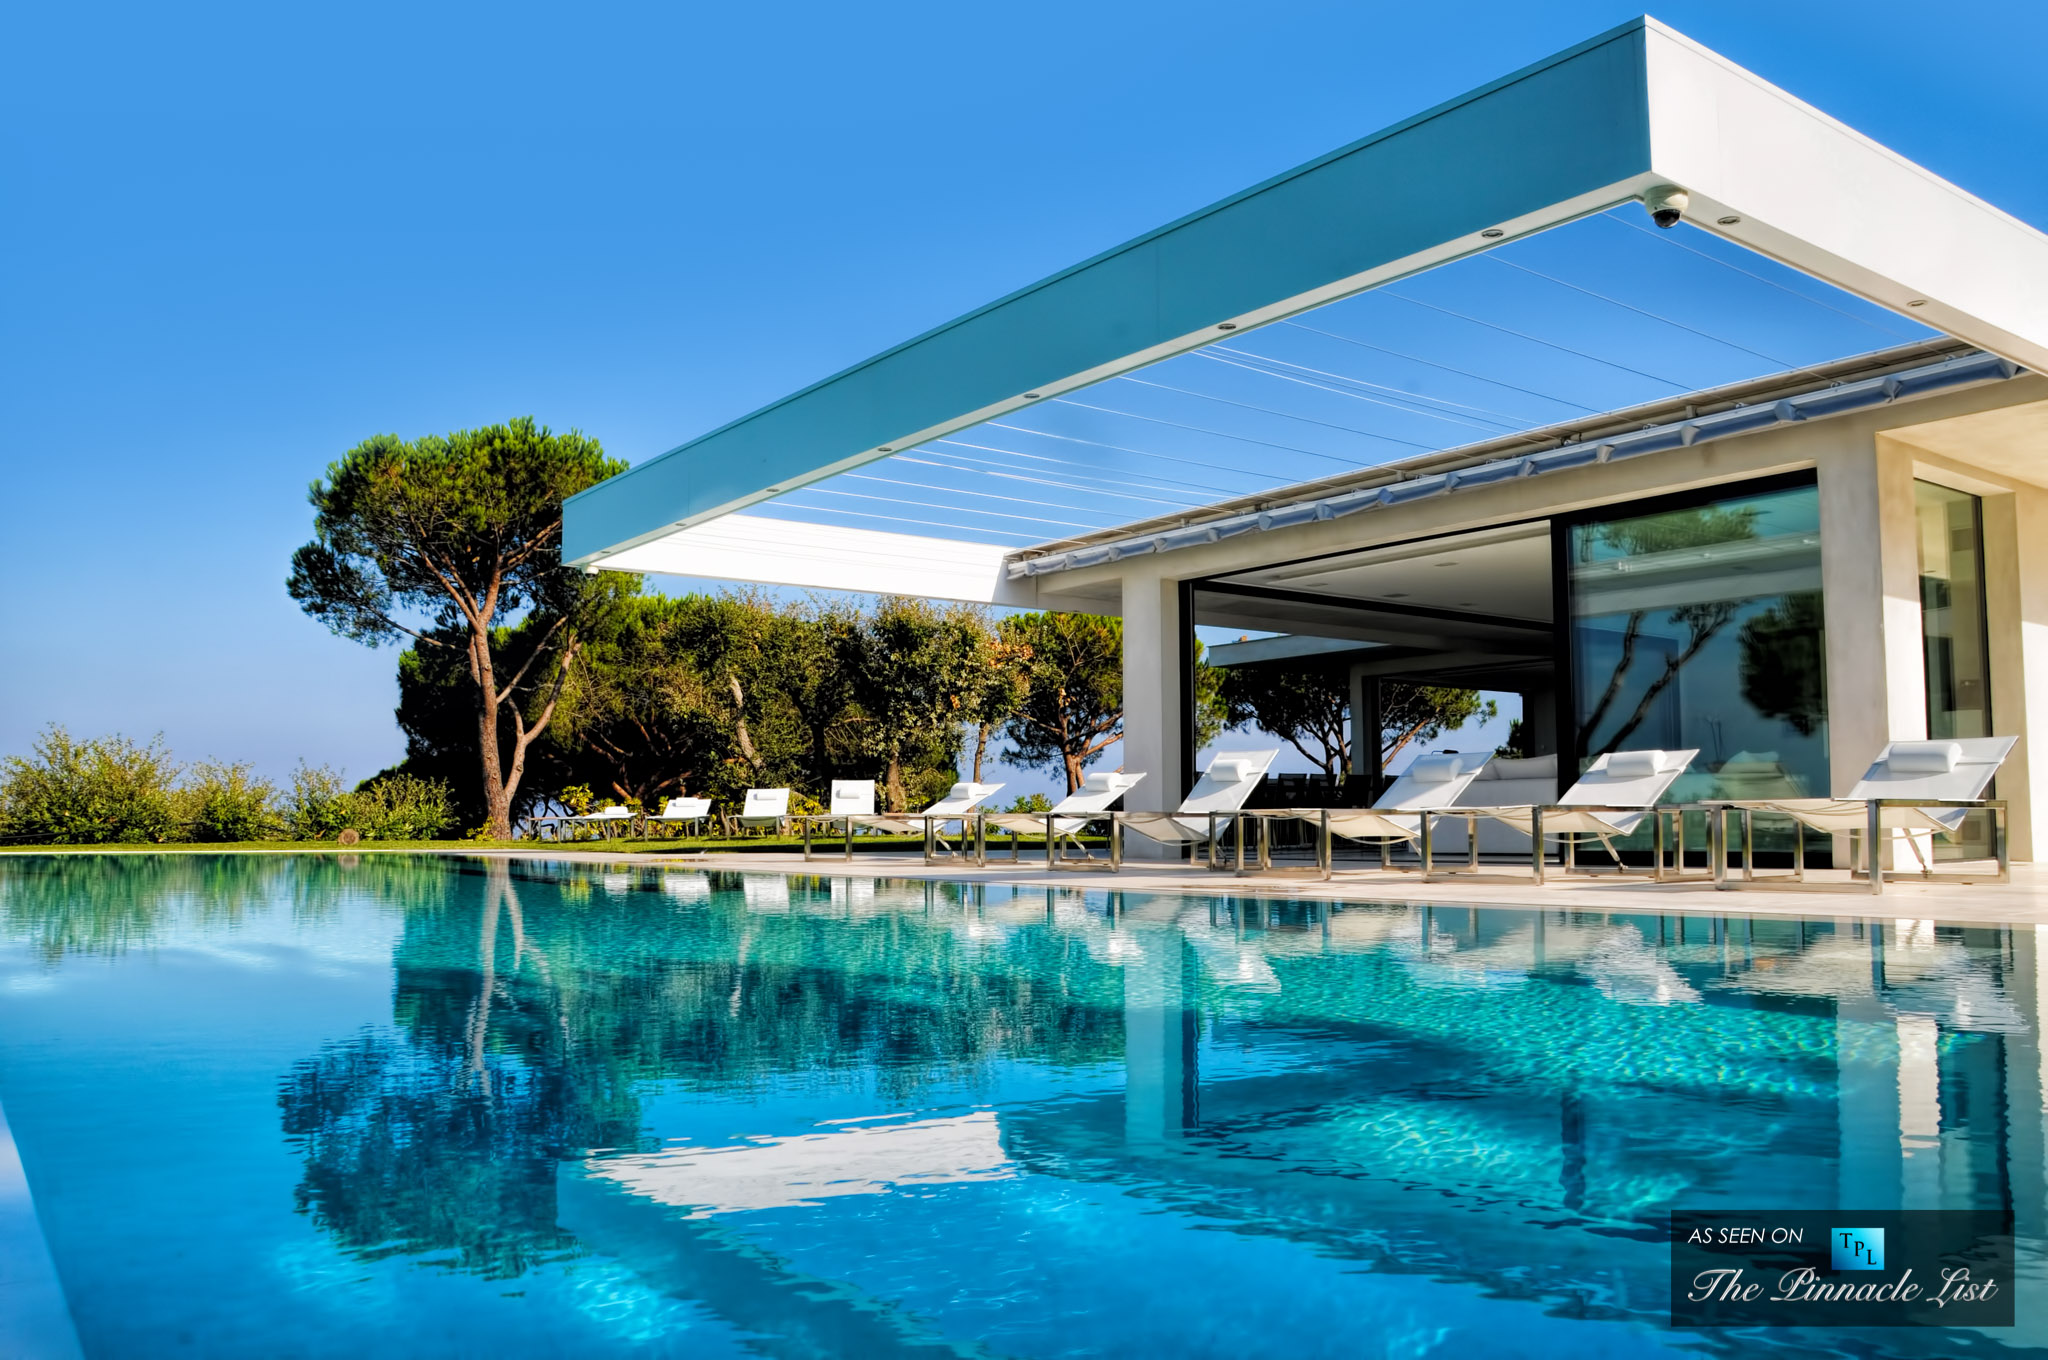 Villa Paradise in St. Tropez – Rent a Family Villa on the French Riviera like No Other